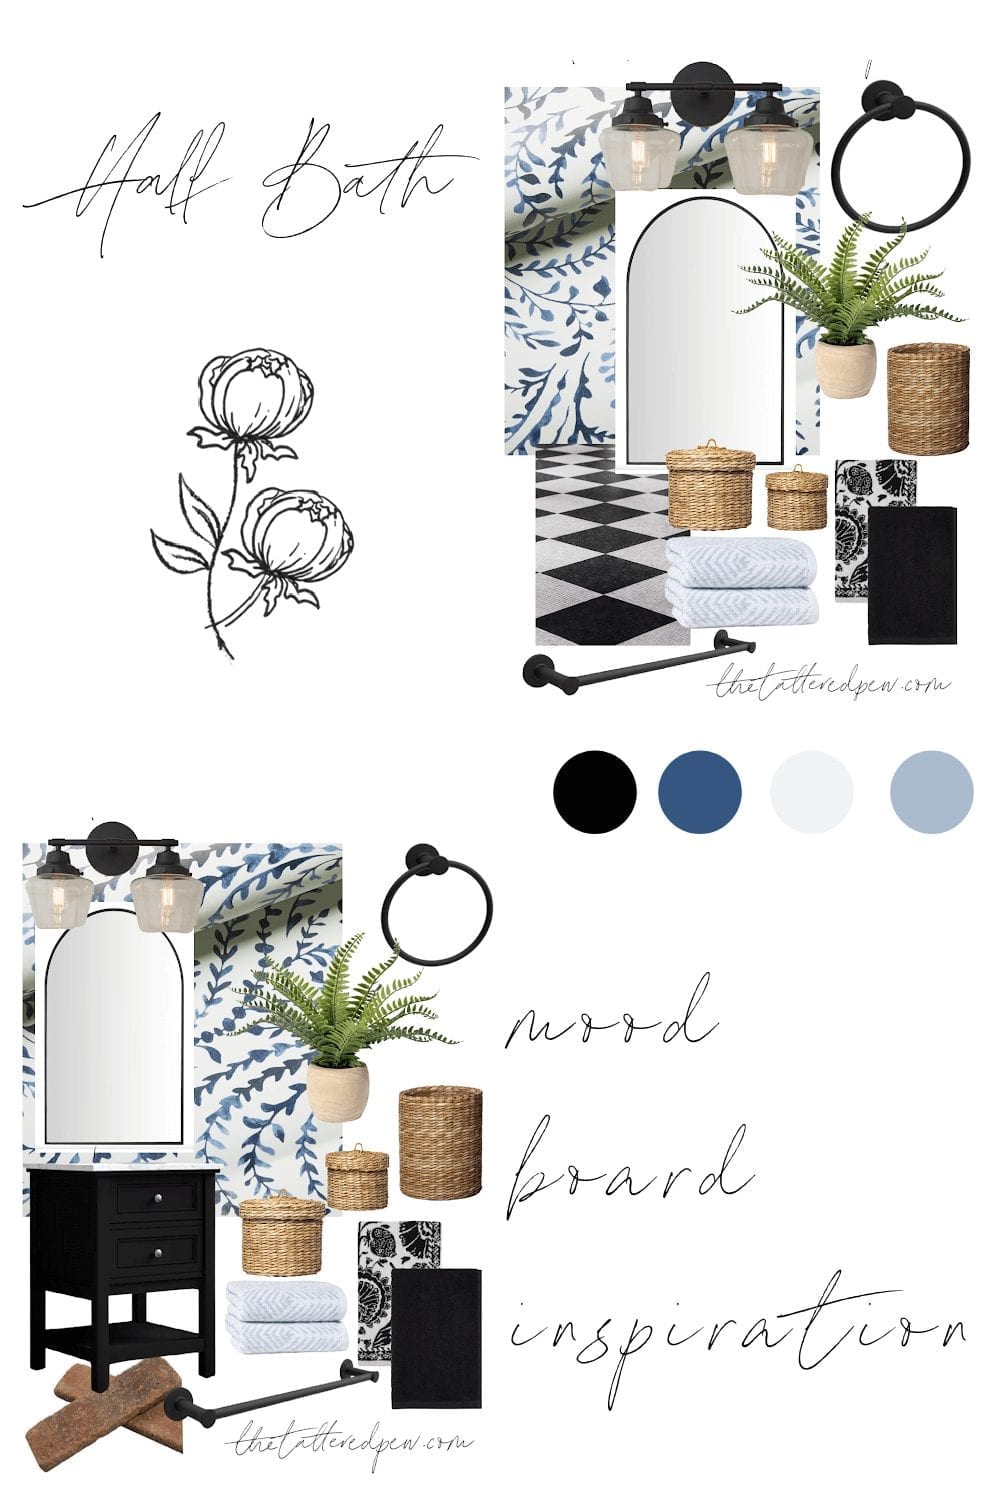 Half bath makeover plans and mood boards!